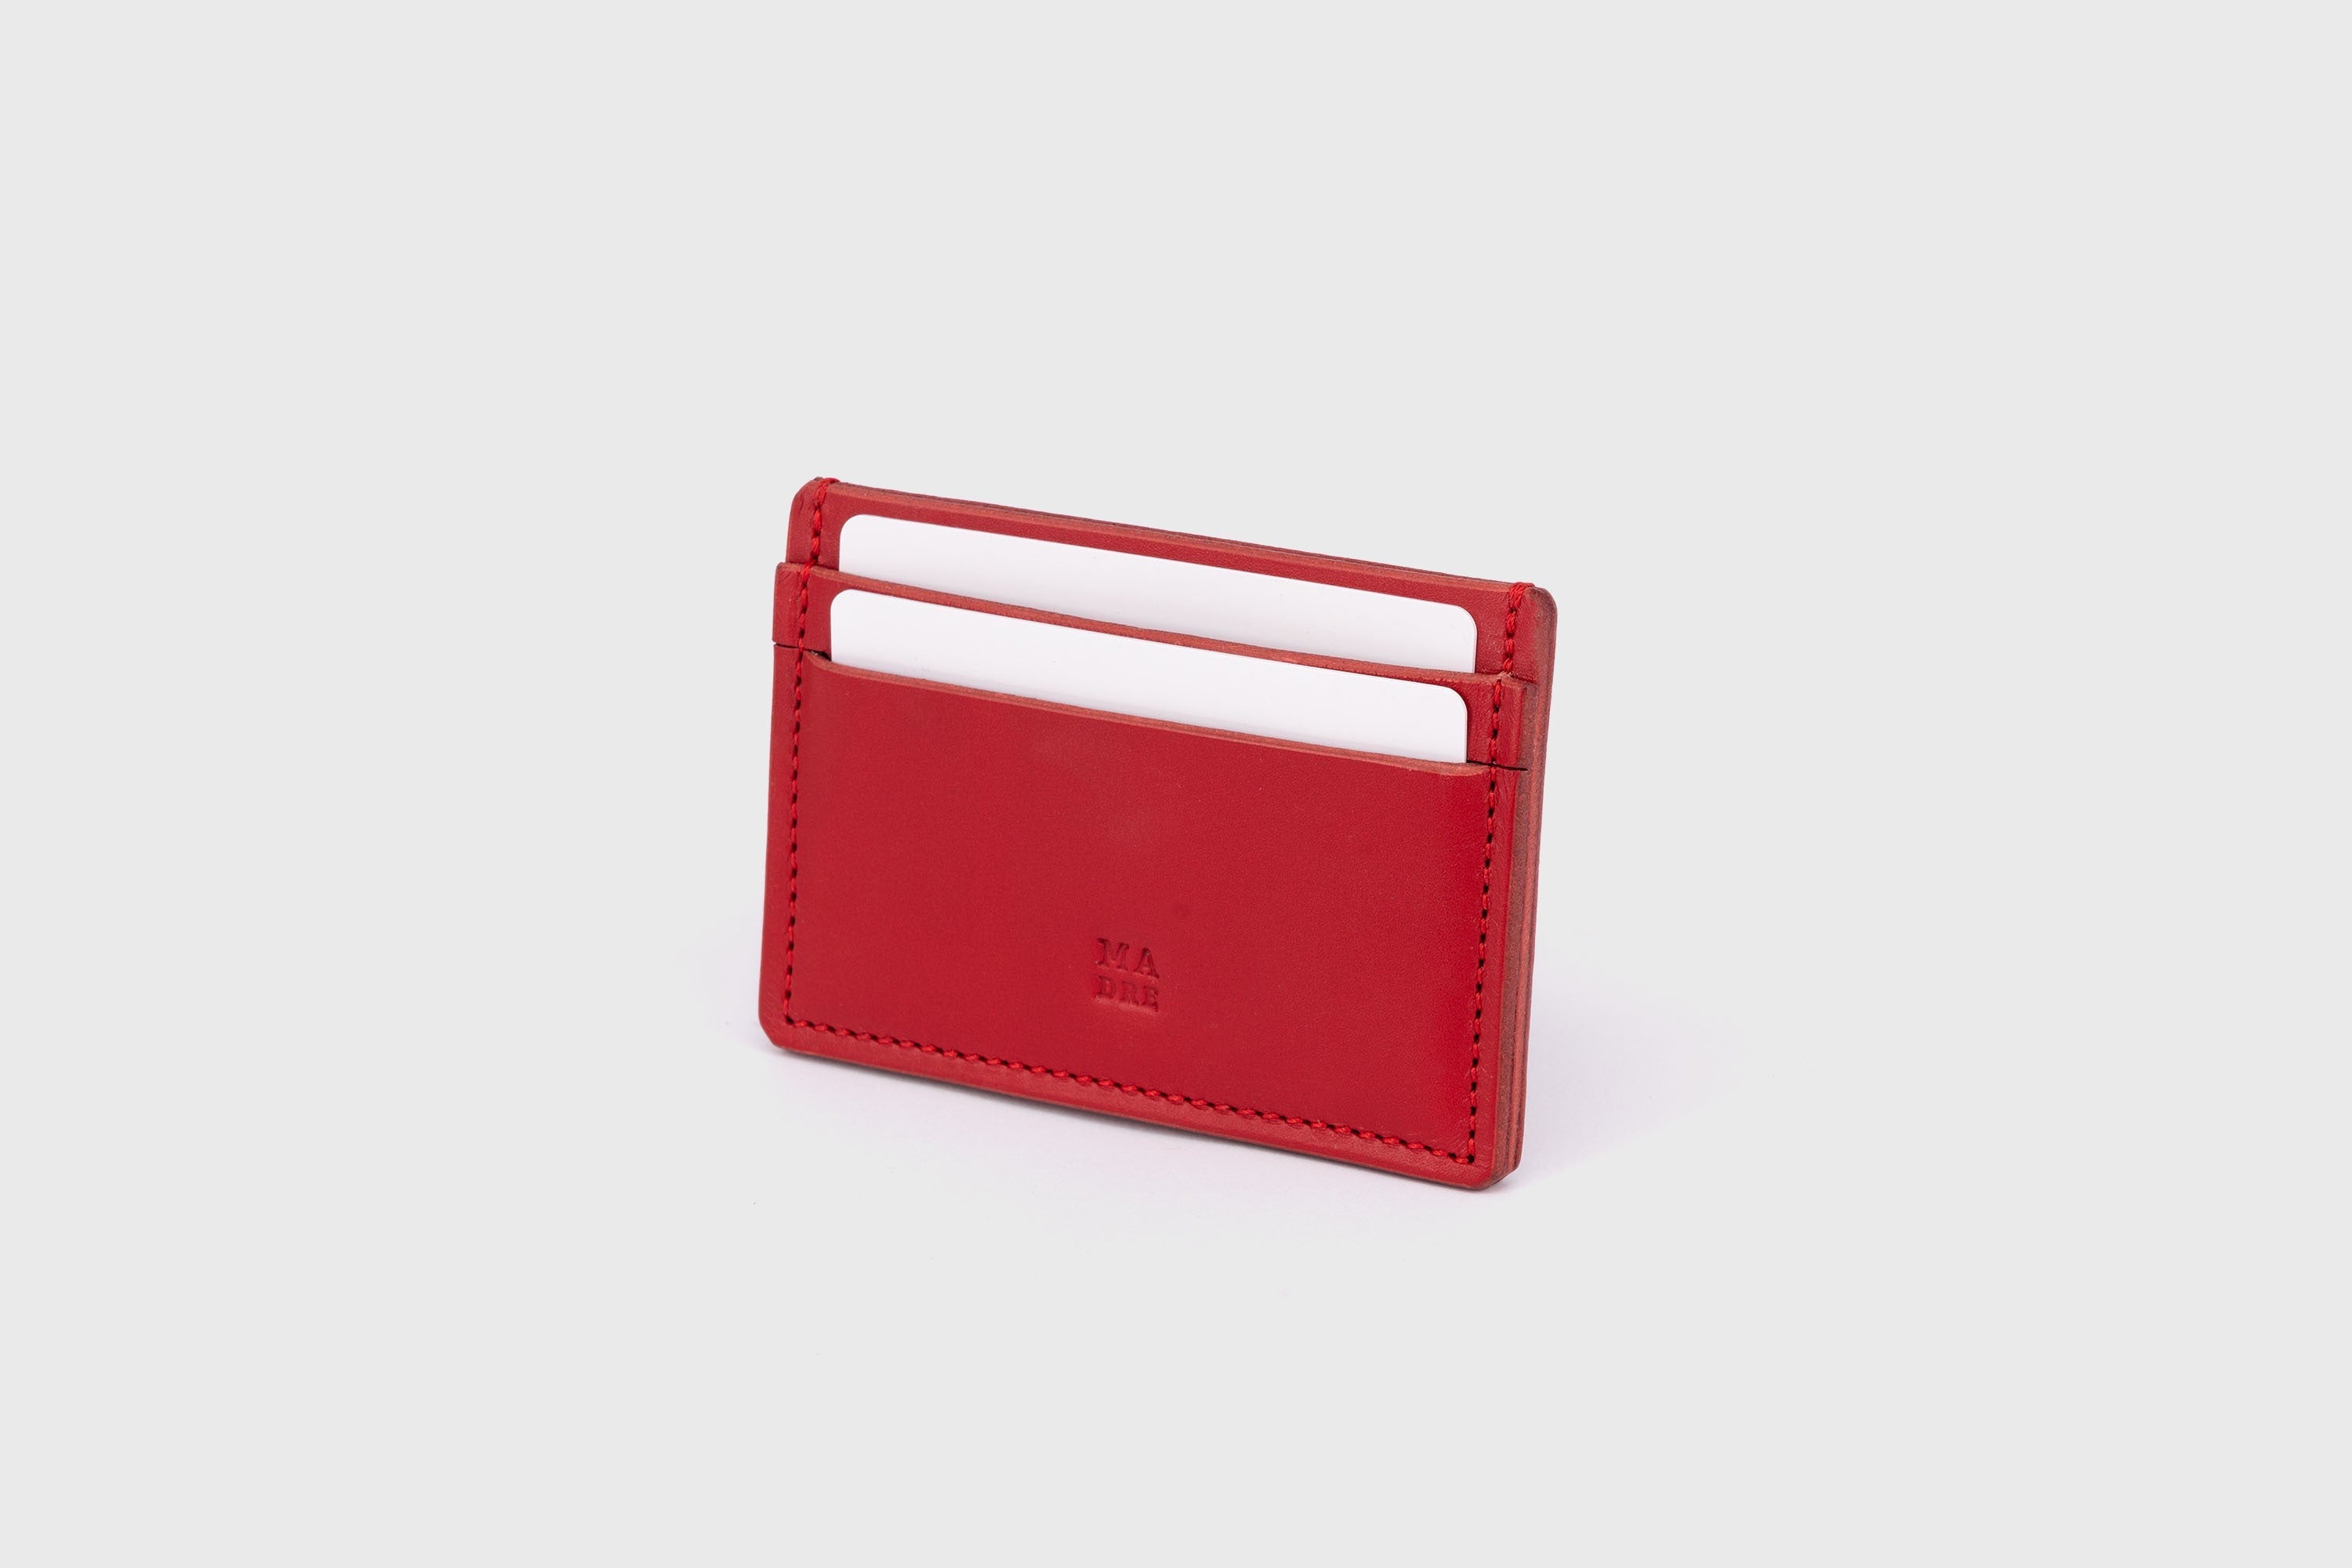 Credit Card Wallet in Red Leather Vachetta Vegetable Tanned Leather Slim Size Handmade and Design by Atelier Madre Manuel Dreesmann Barcelona Spain